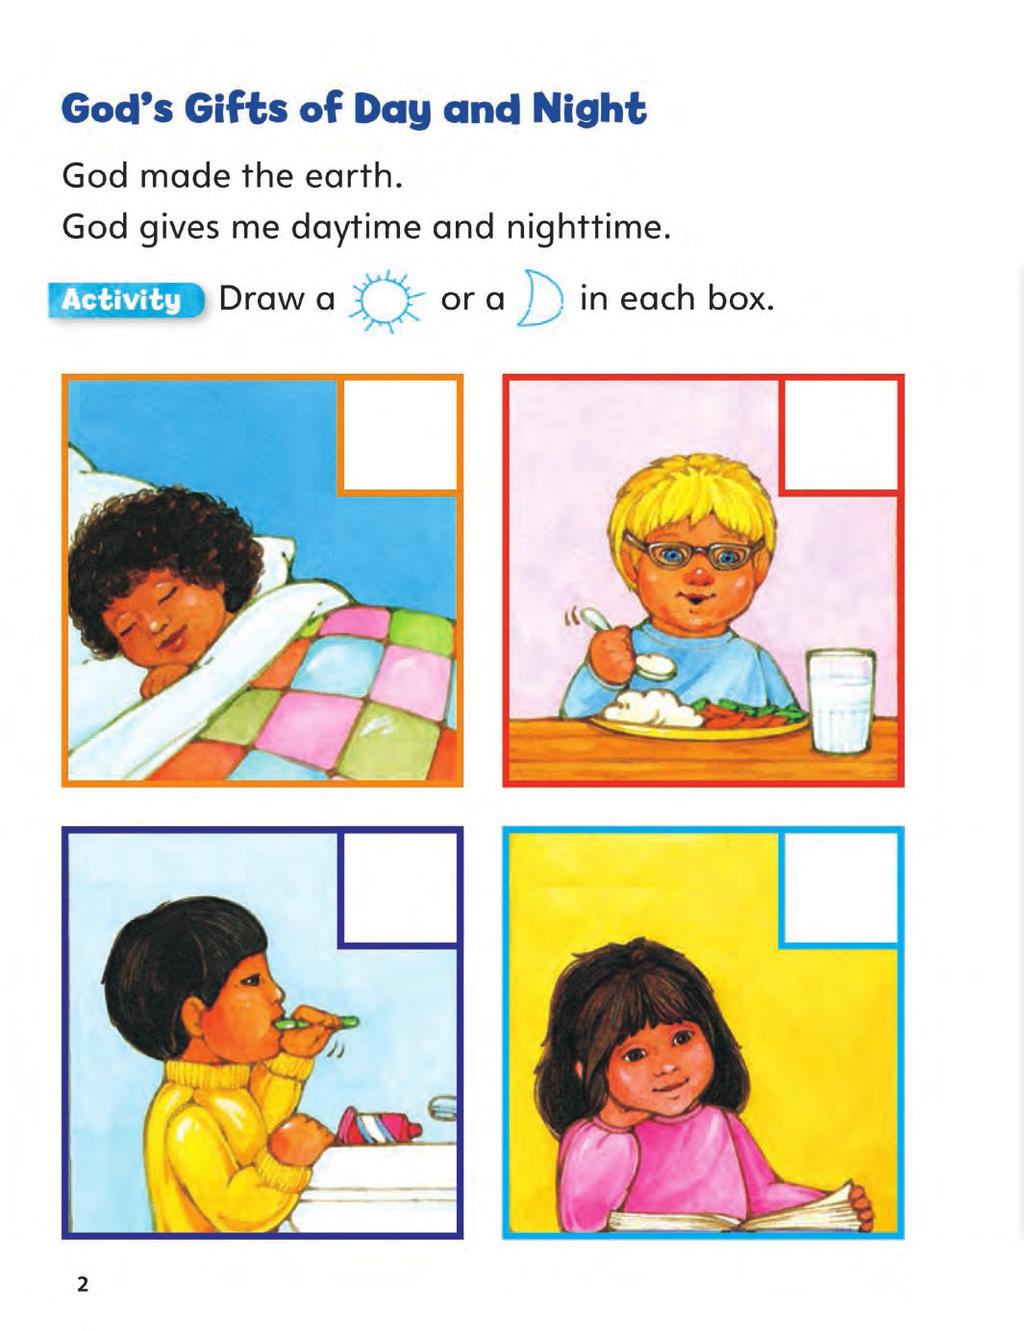 Kindergarten Student Edition Lesson DOCTRINE LESSON The chapter lessons consist of doctrine, Scripture, liturgical texts, and